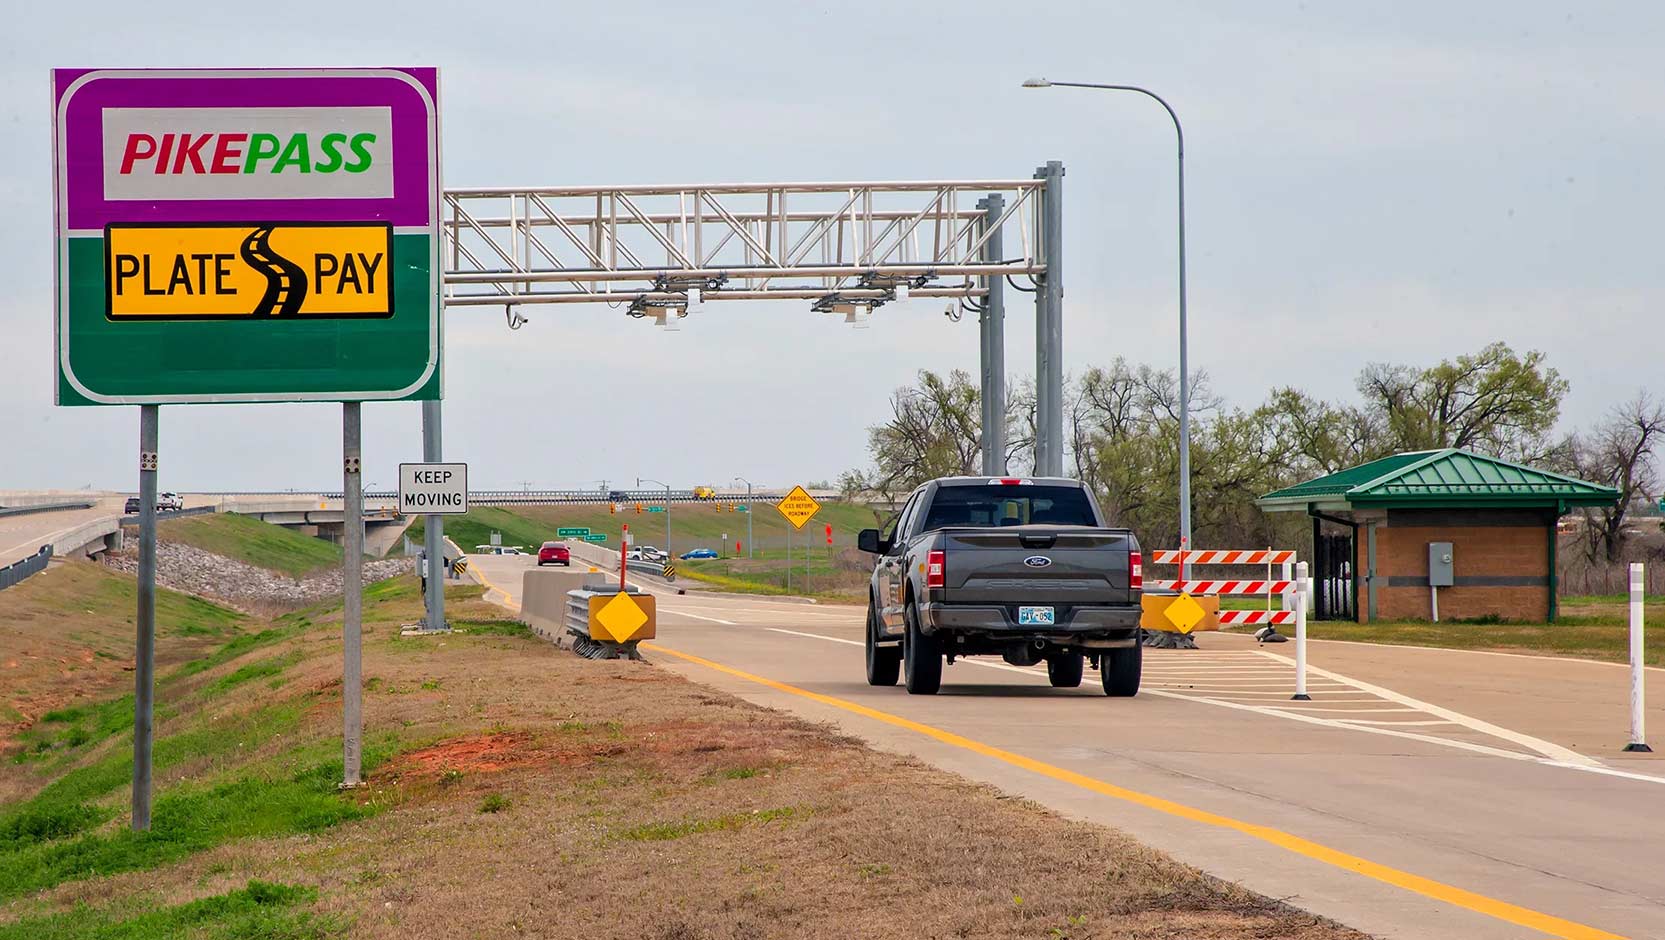 Oklahoma Turnpike's Cashless Tolling Transition Continues | BancPass Cash Reloadable Toll Sticker